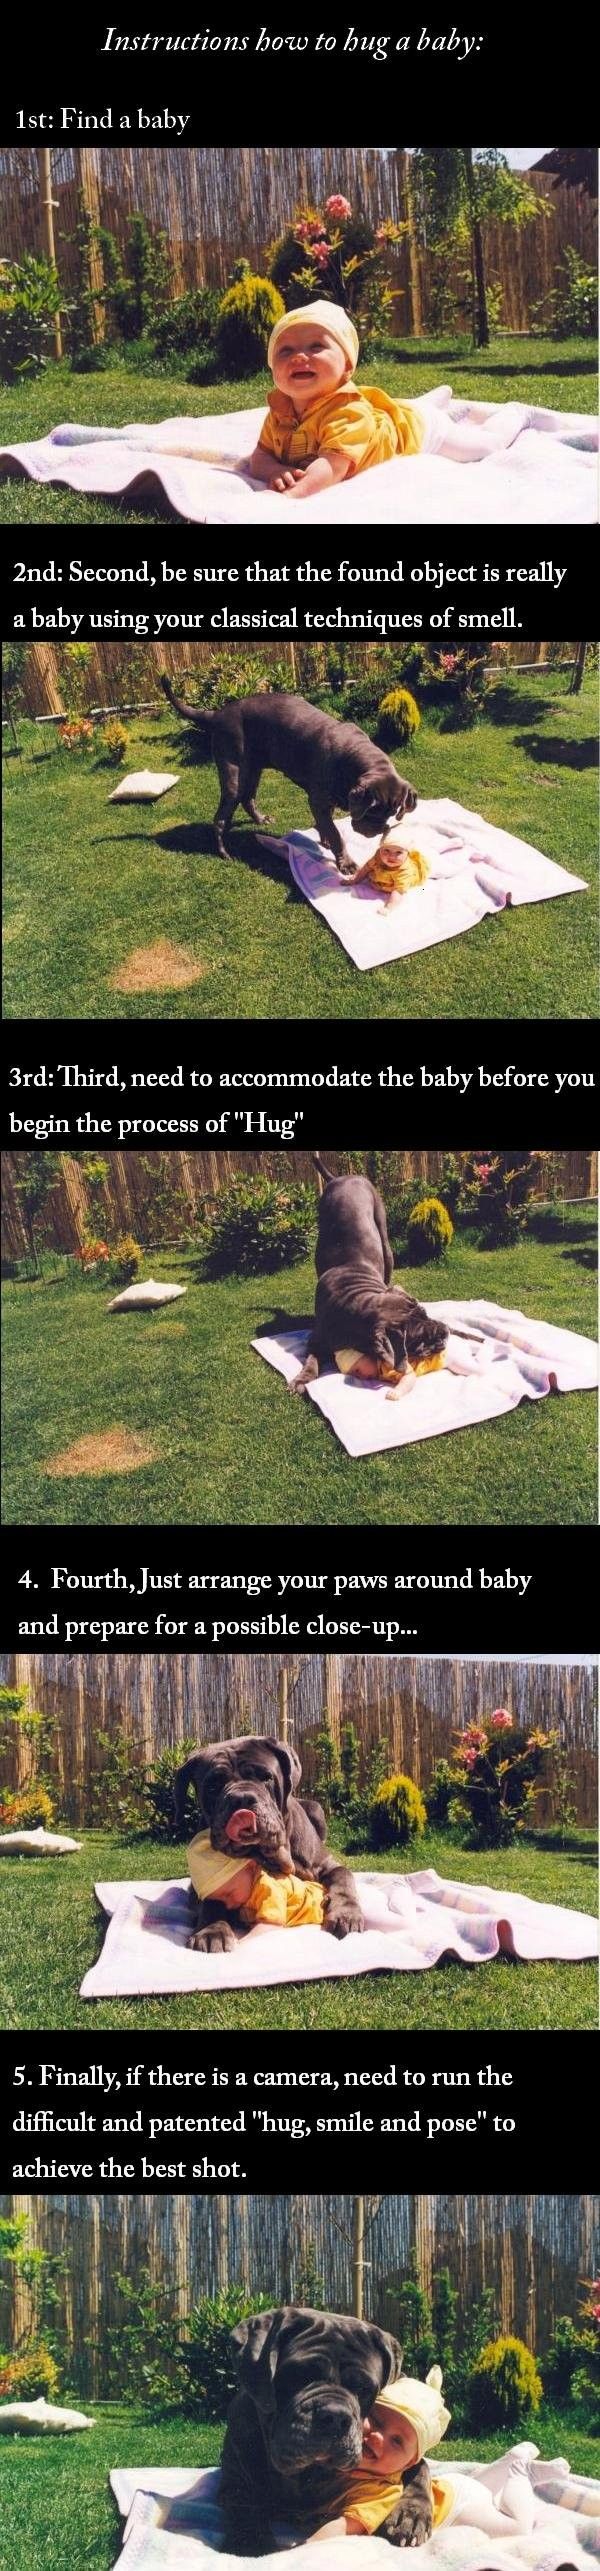 Instructions how to hug a baby: 1st: Find a baby 2nd: Second, be sure that the found object is really a baby using your classical techniques of smell.